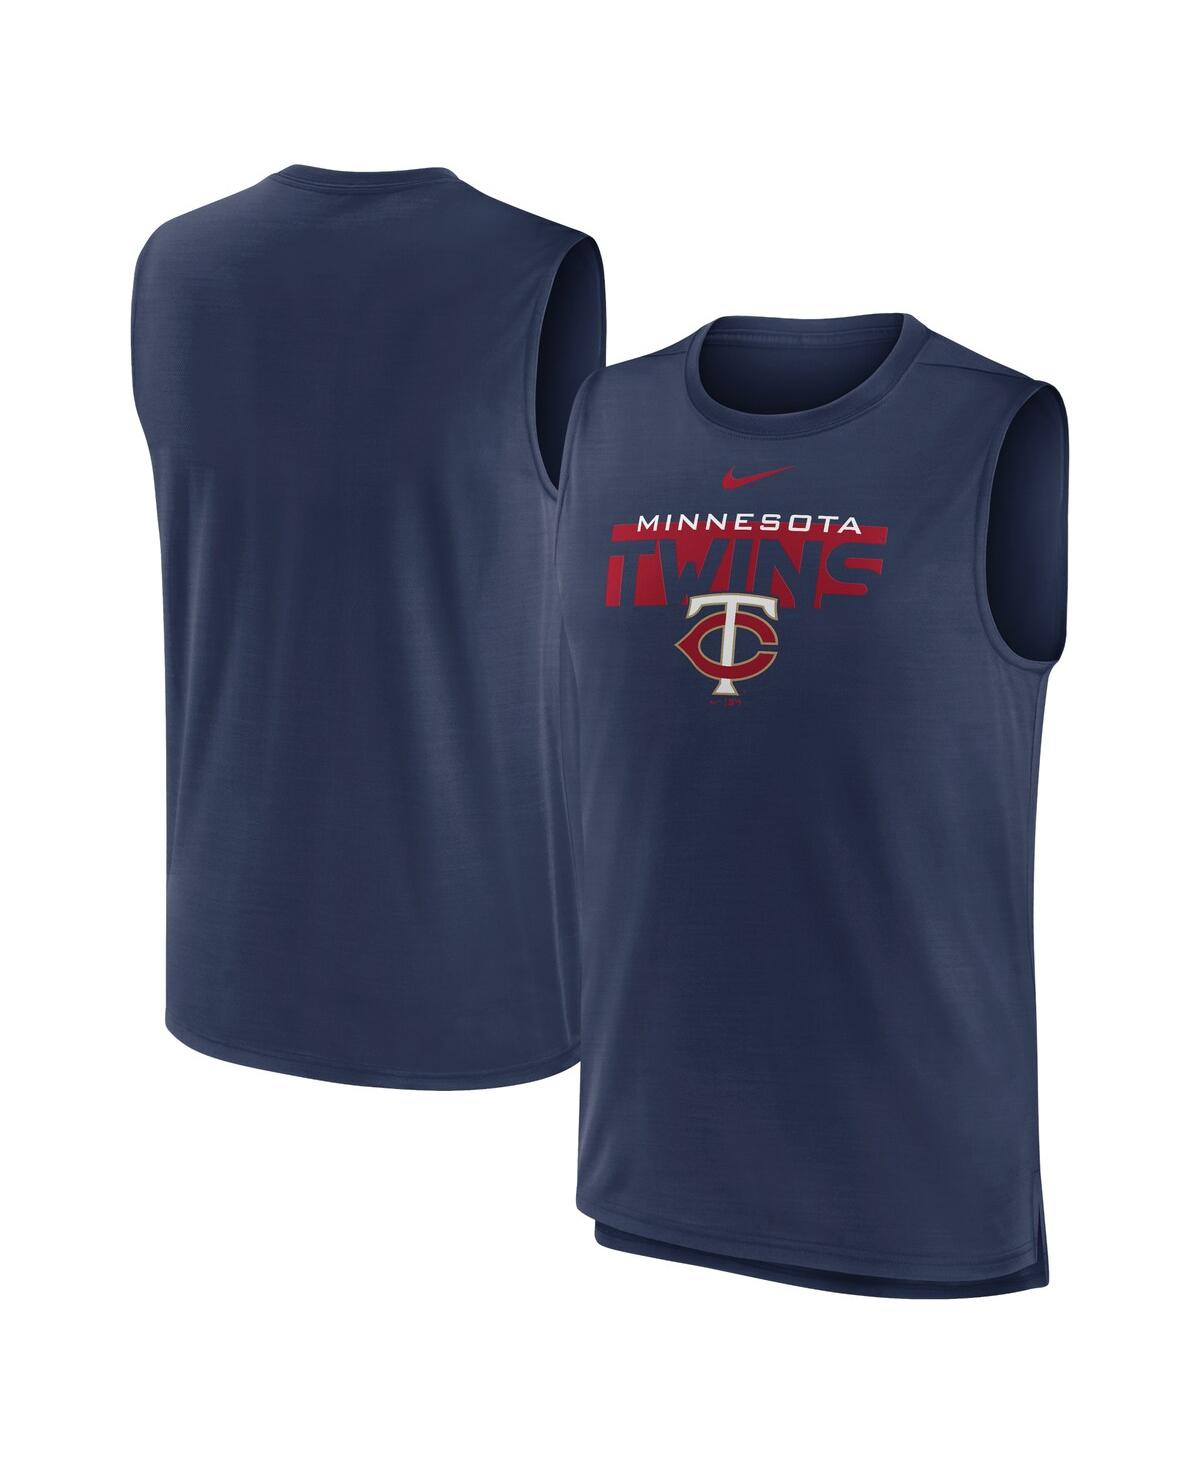 NIKE MEN'S NIKE NAVY MINNESOTA TWINS KNOCKOUT STACK EXCEED PERFORMANCE MUSCLE TANK TOP